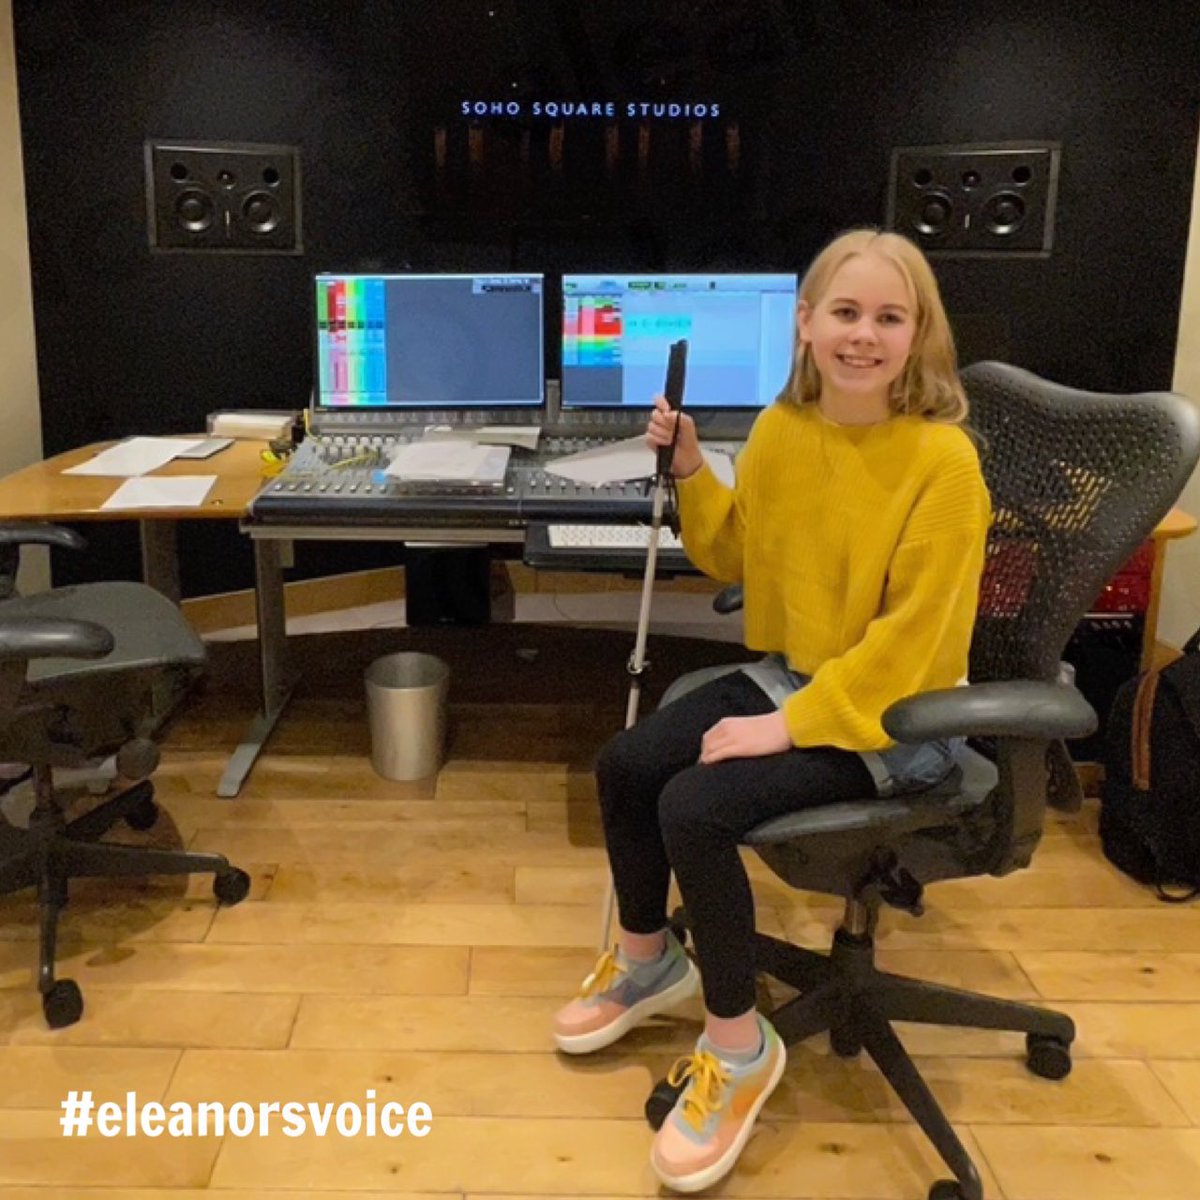 Over the past year, Eleanor has been working hard voicing the role of ‘Lark’ for brand new episodes of Milo (season 2). Catch them on Channel5 weekday mornings! Merchandise is here too, so Eleanor now knows exactly what her character is like! There’s even an App! #eleanorsvoice🤩